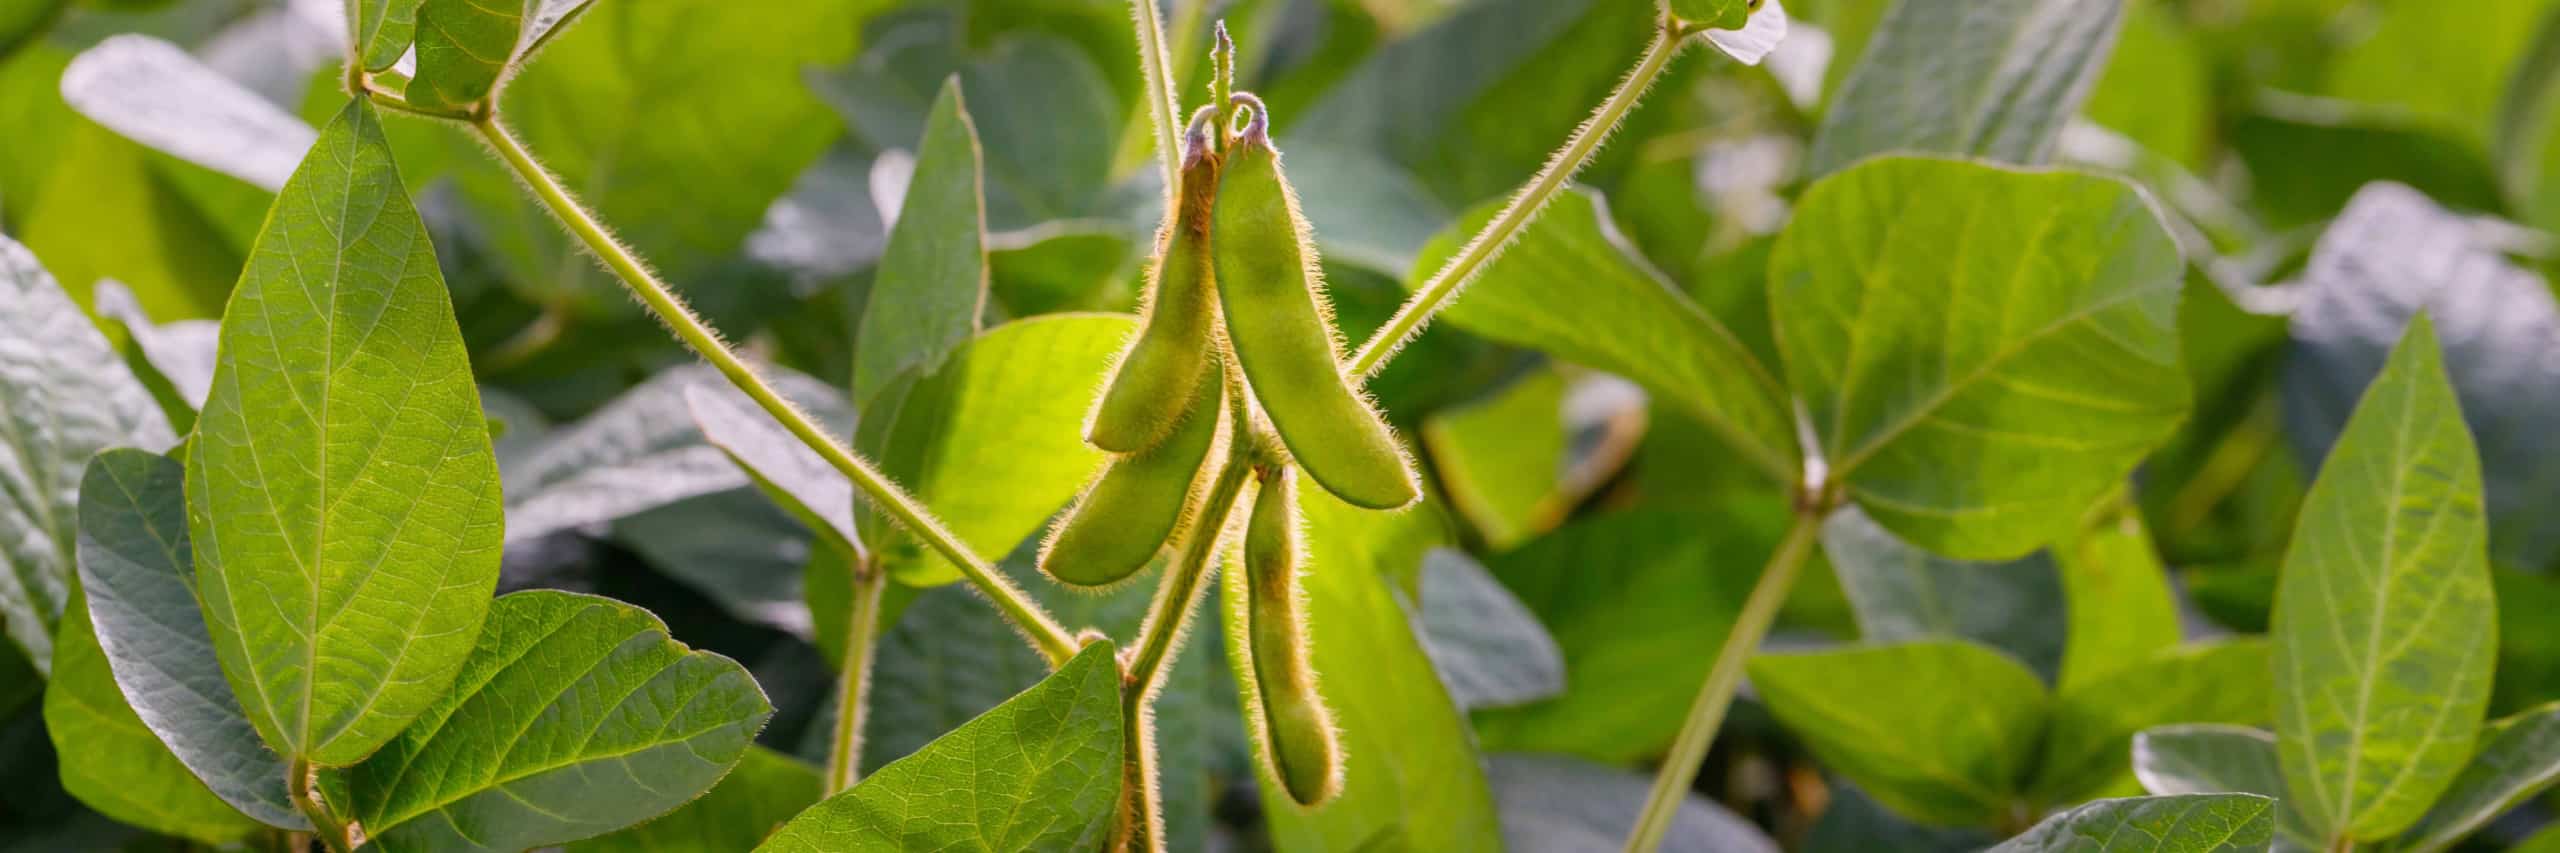 Soybean pods in agricultural soy plantation